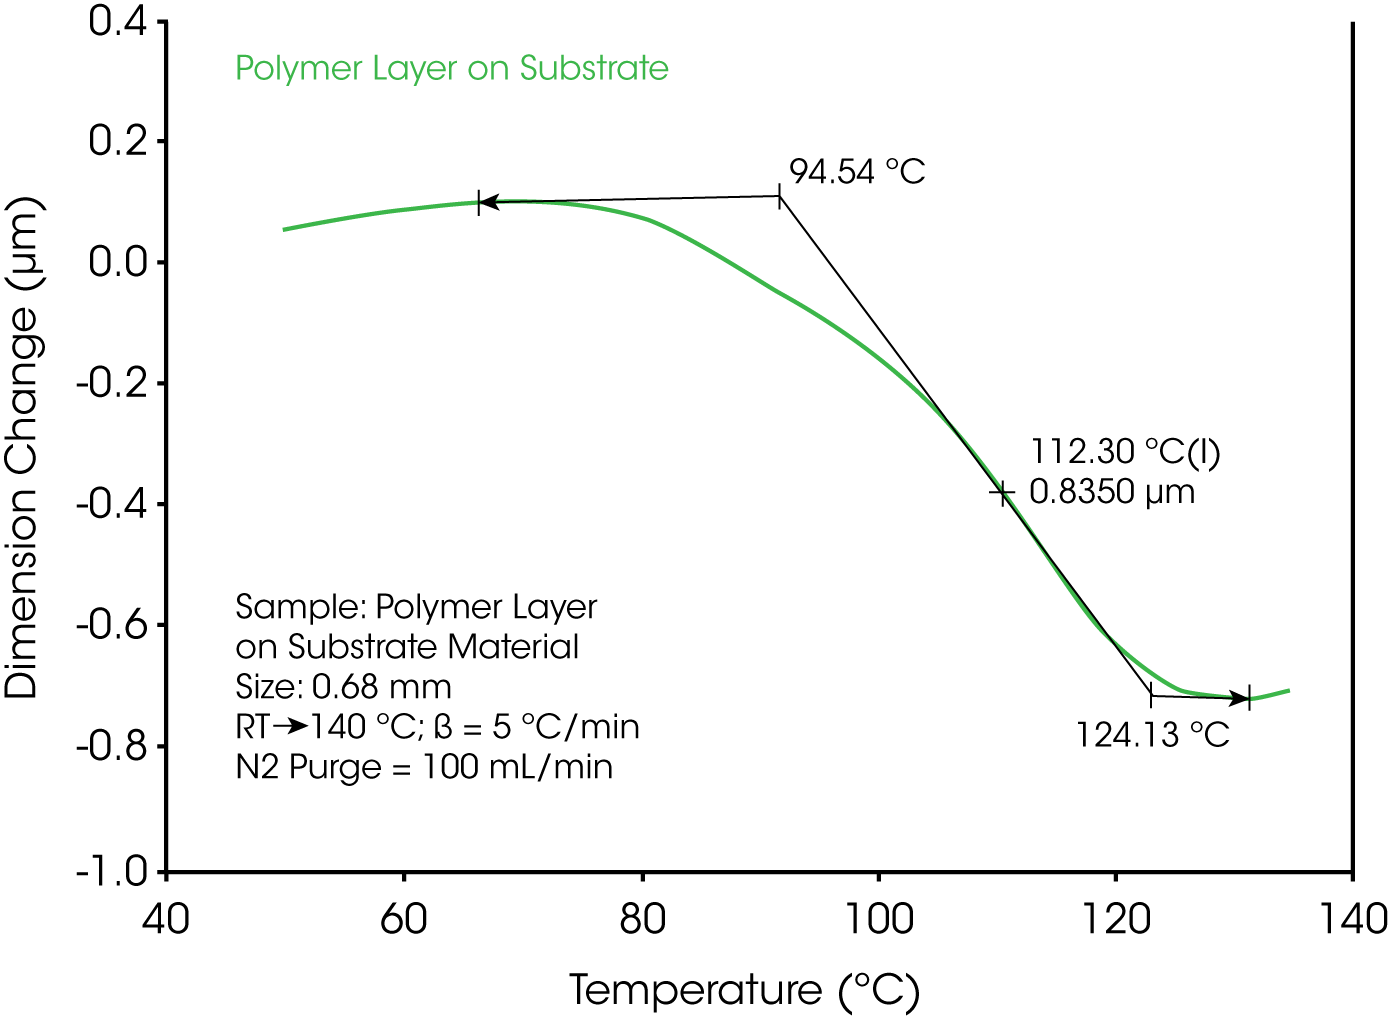 Figure 1. TMA Penetration of Polymer Layer on Substrate Material